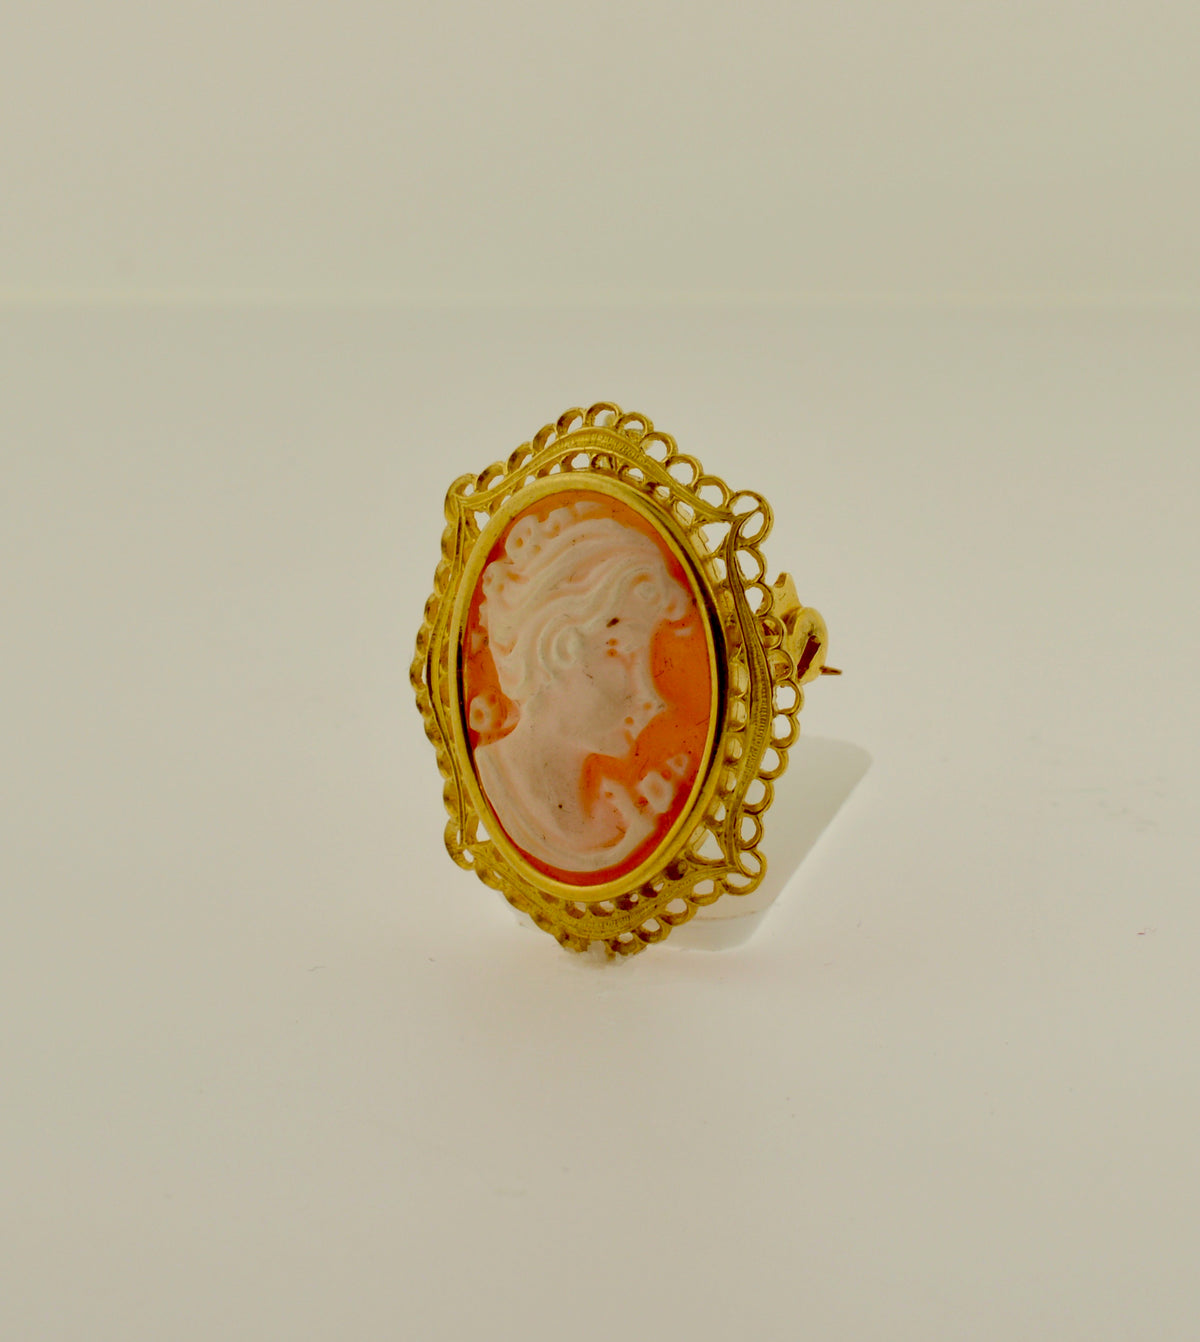 Antique Shell Cameo Gold Brooch/Pendant with Filigree Frame